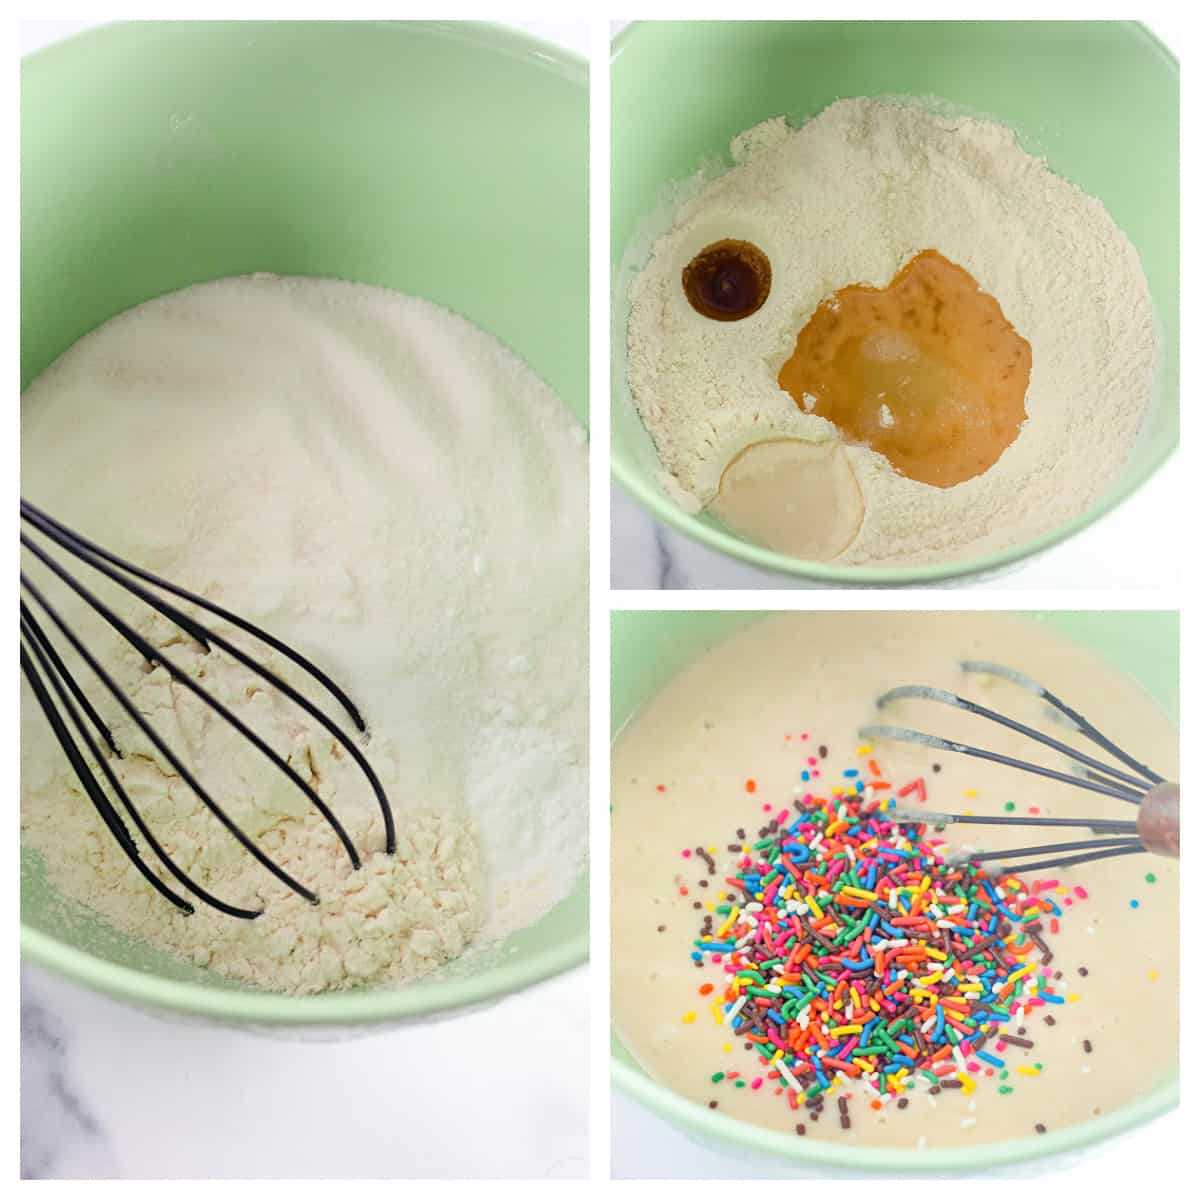 Mixing the dry ingredients, wells of wet ingredients, mixed cake batter with funfetti added.